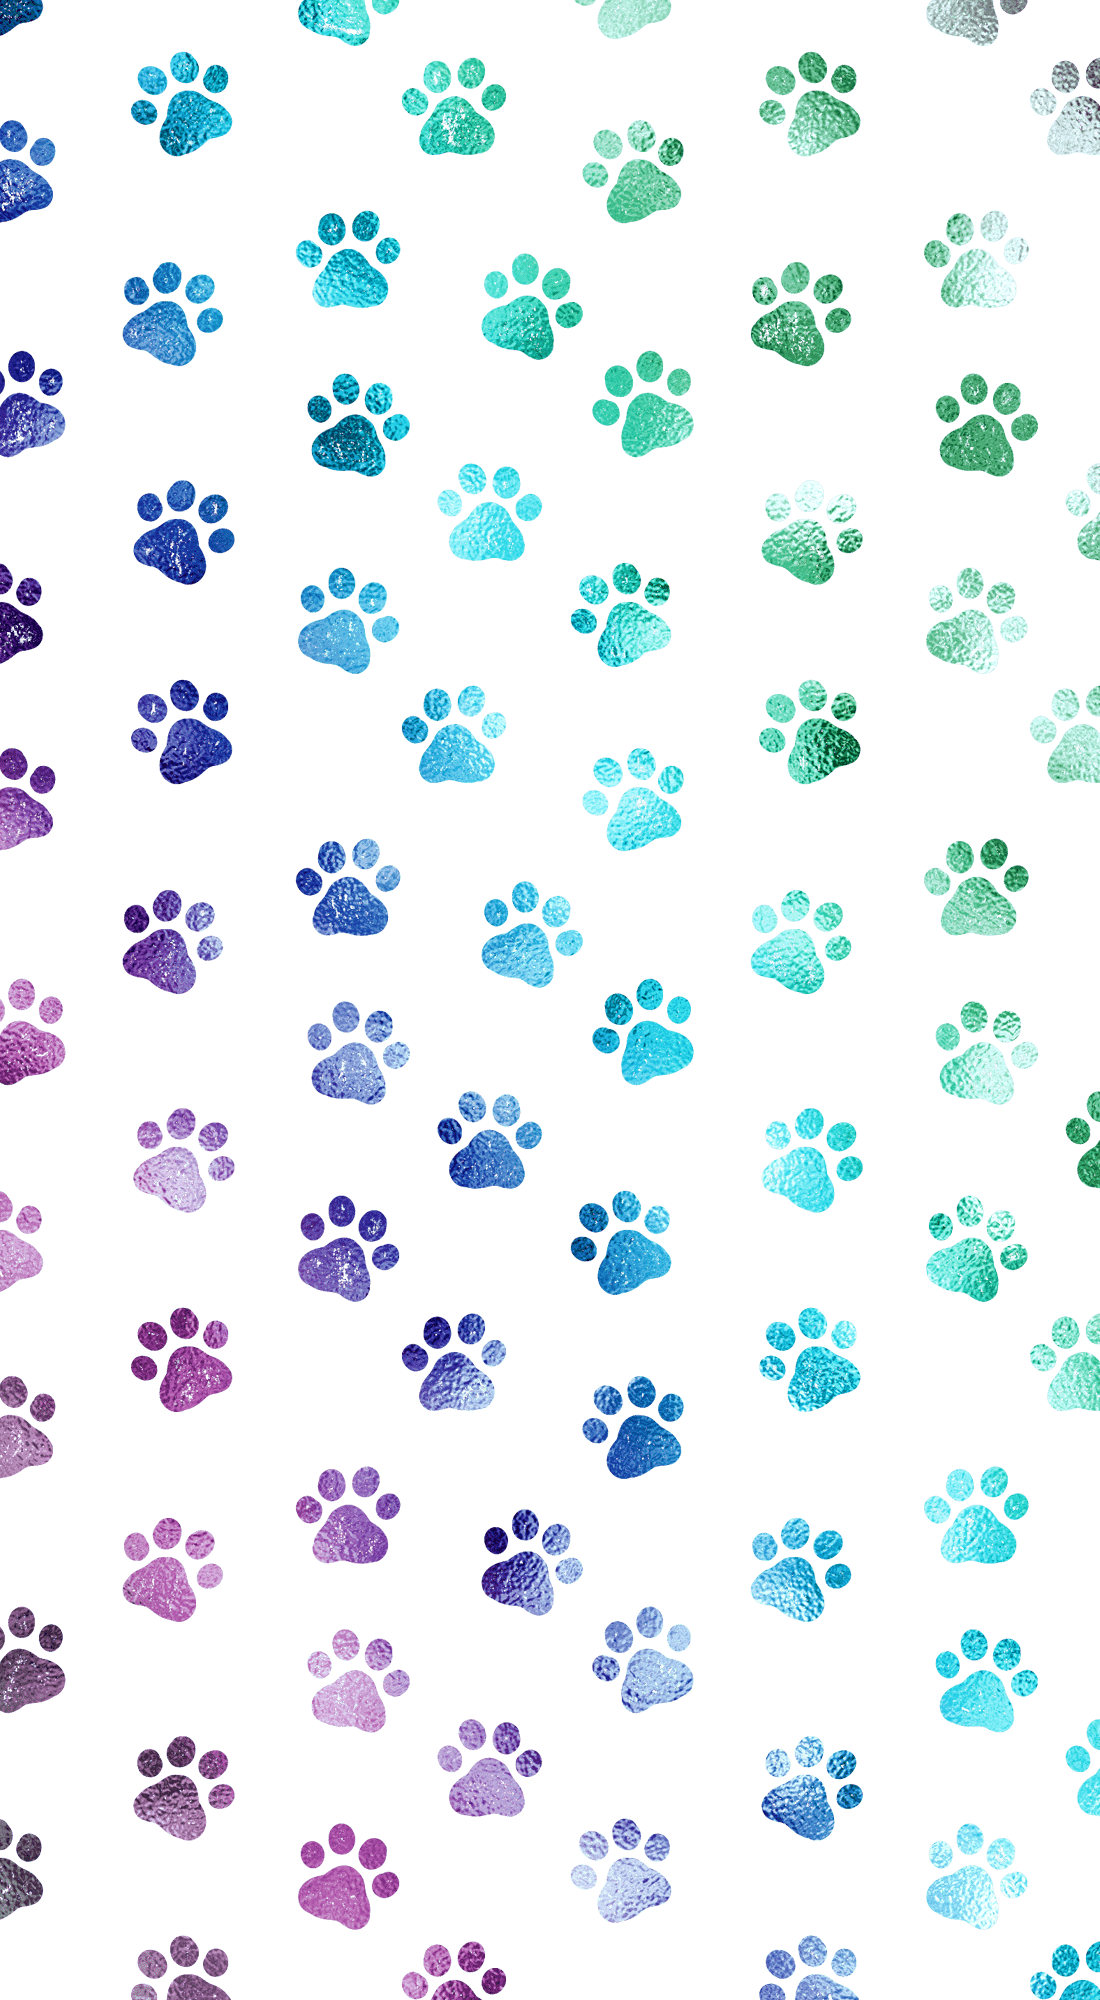 Paw Print Backgrounds